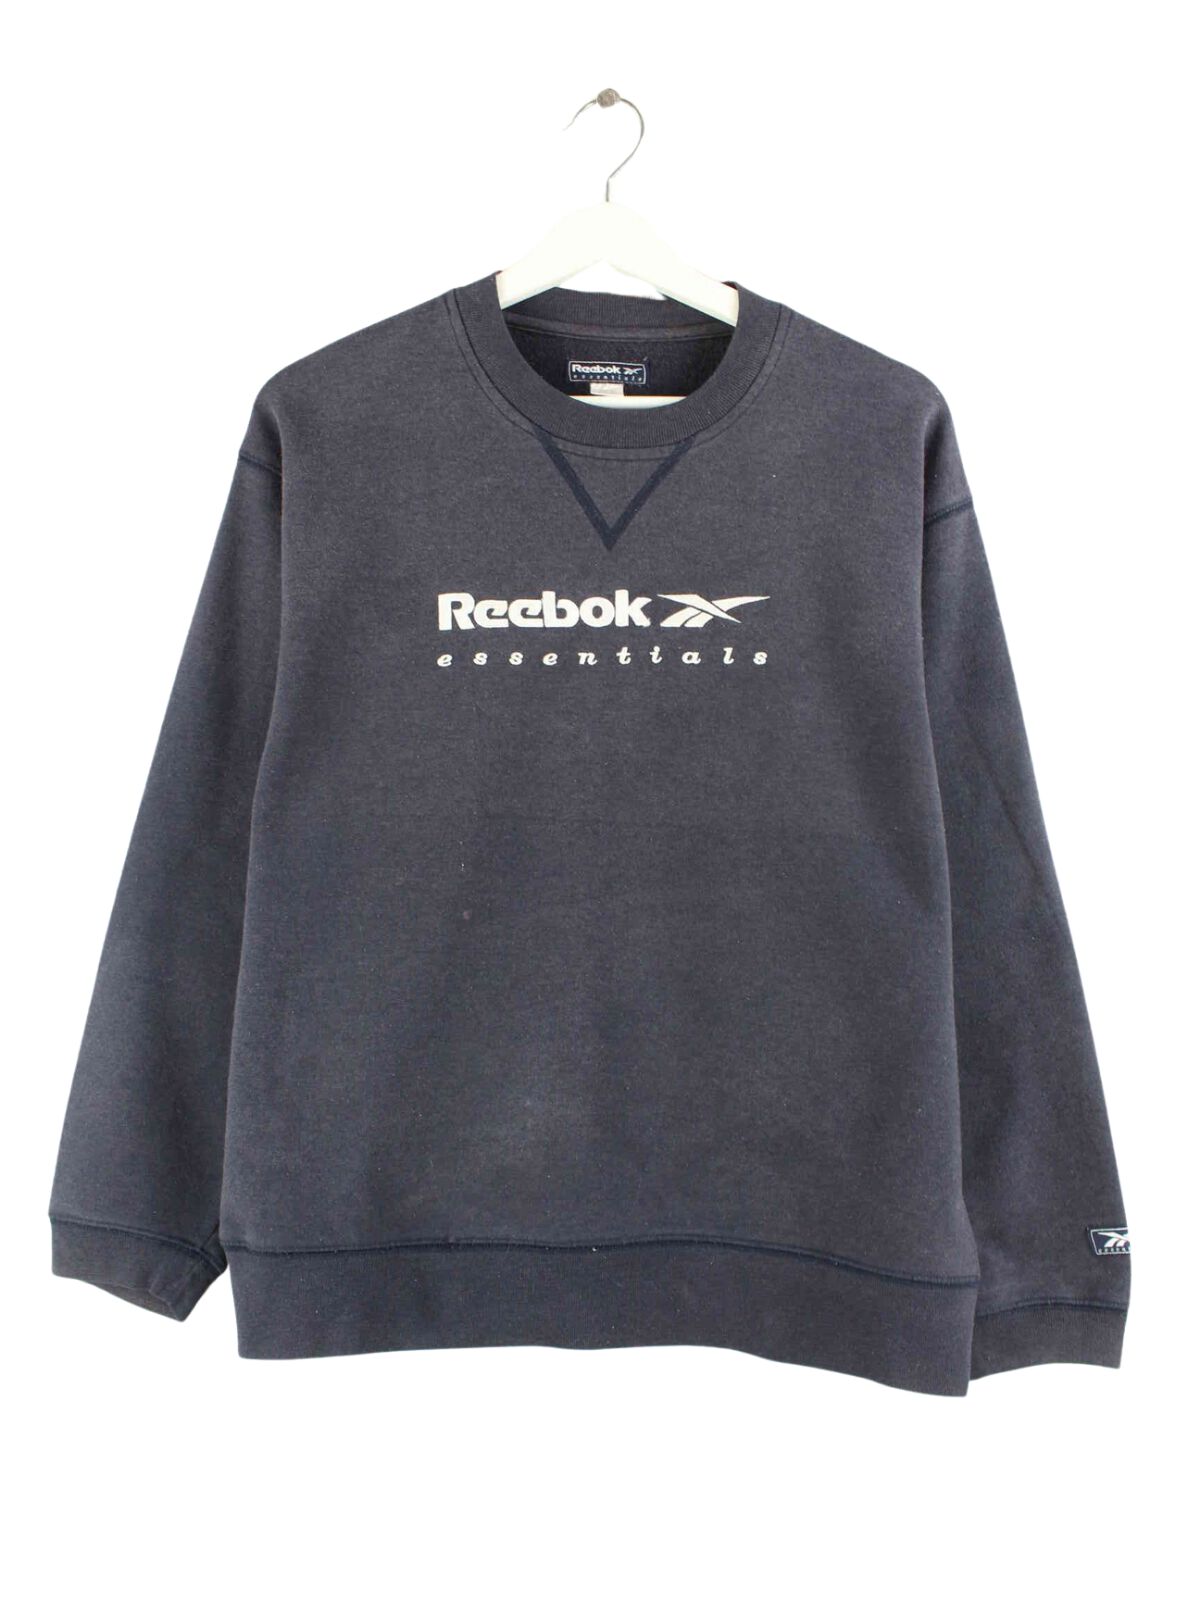 Reebok y2k Embroidered Sweater Blau XS (front image)